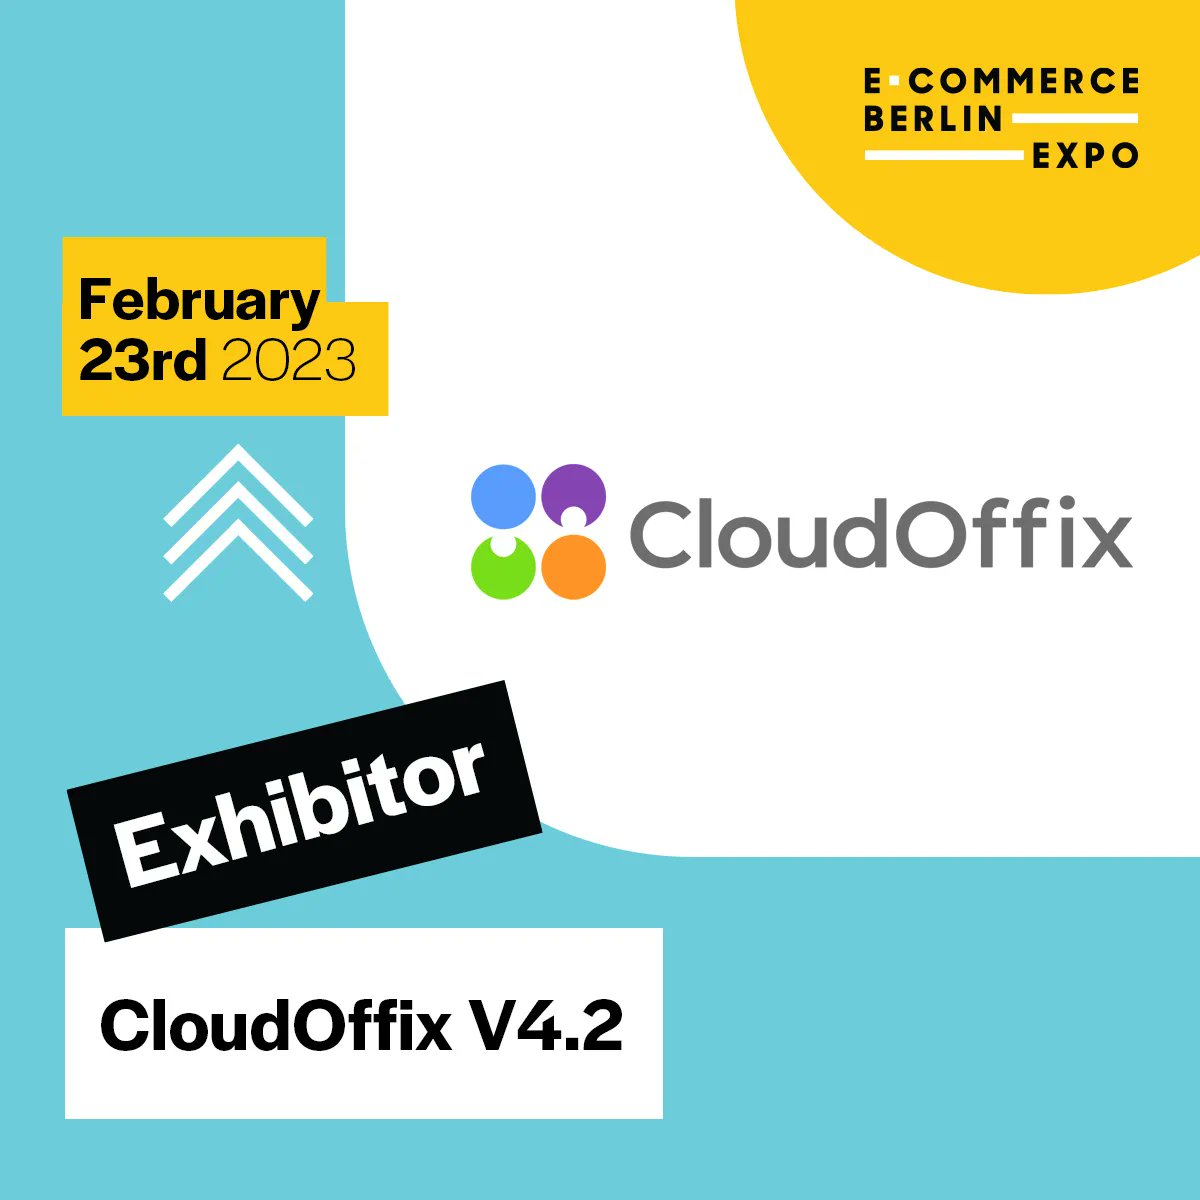 We’re on cloud nine because @cloudoffix has joined us at the E-commerce Berlin Expo 2023! Welcome on board! 🔥 
Learn more about them: buff.ly/3DHOMdd 
Come to STATION Berlin on Feb 23rd and enjoy our event for free! Sign up here: buff.ly/3DUj9y7